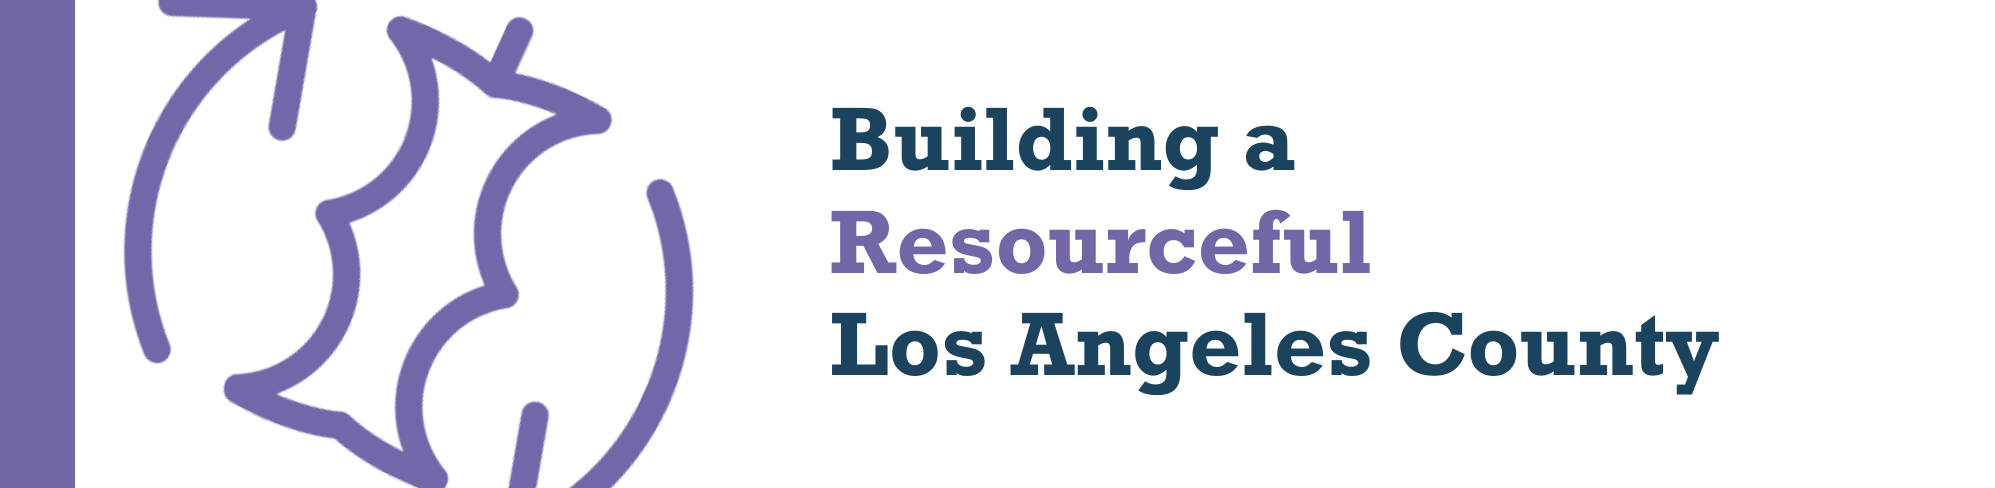 Building A Resourceful LA County